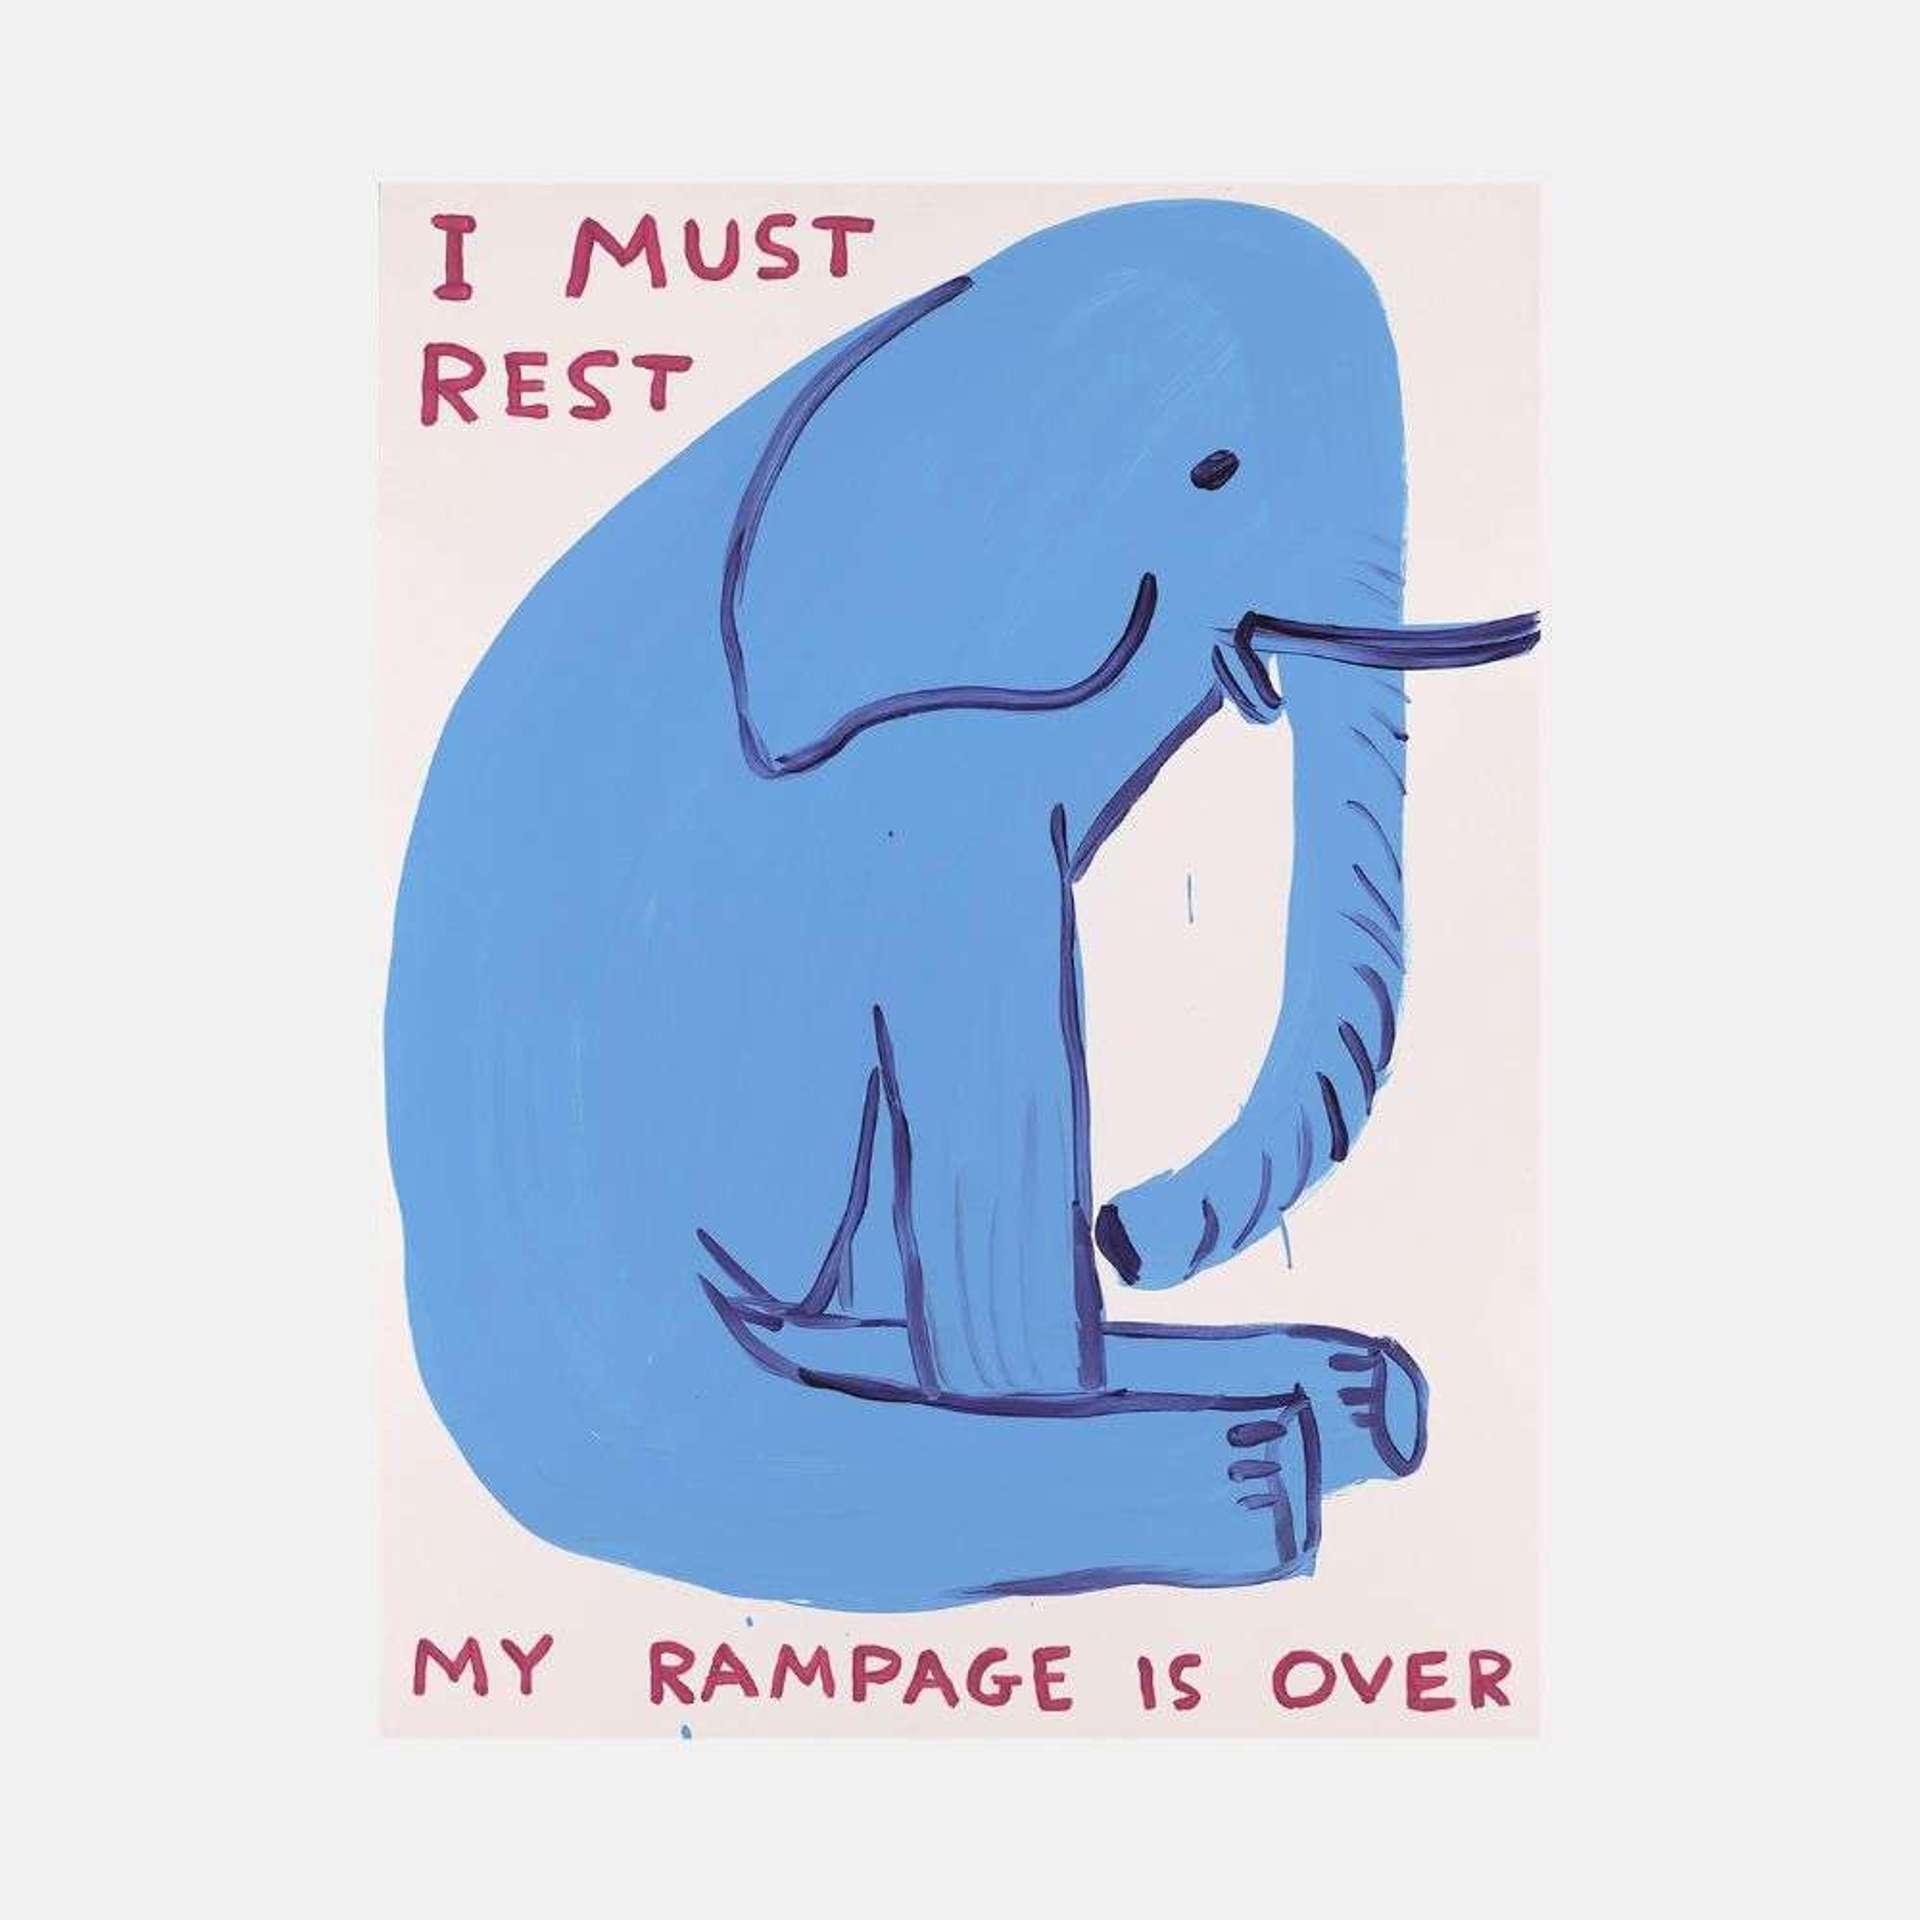 My Rampage Is Over by David Shrigley